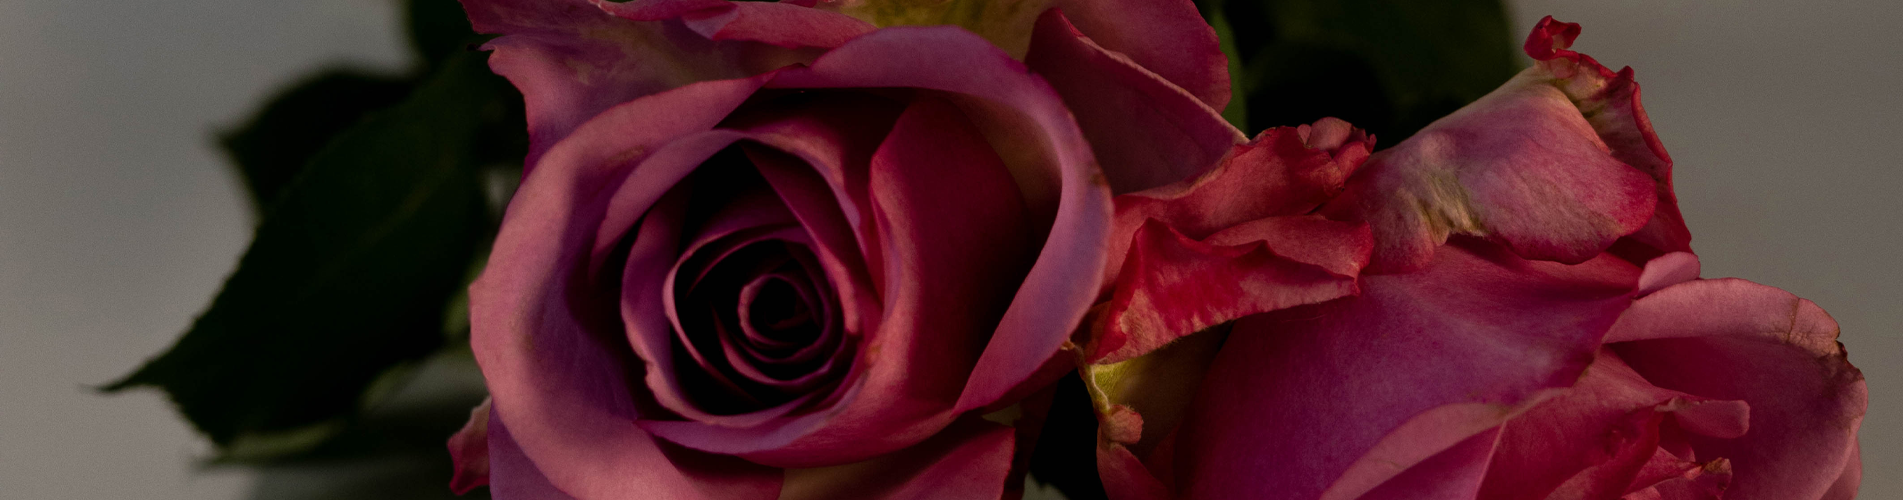 Banner Image Of The Rose Fragrance Product Category